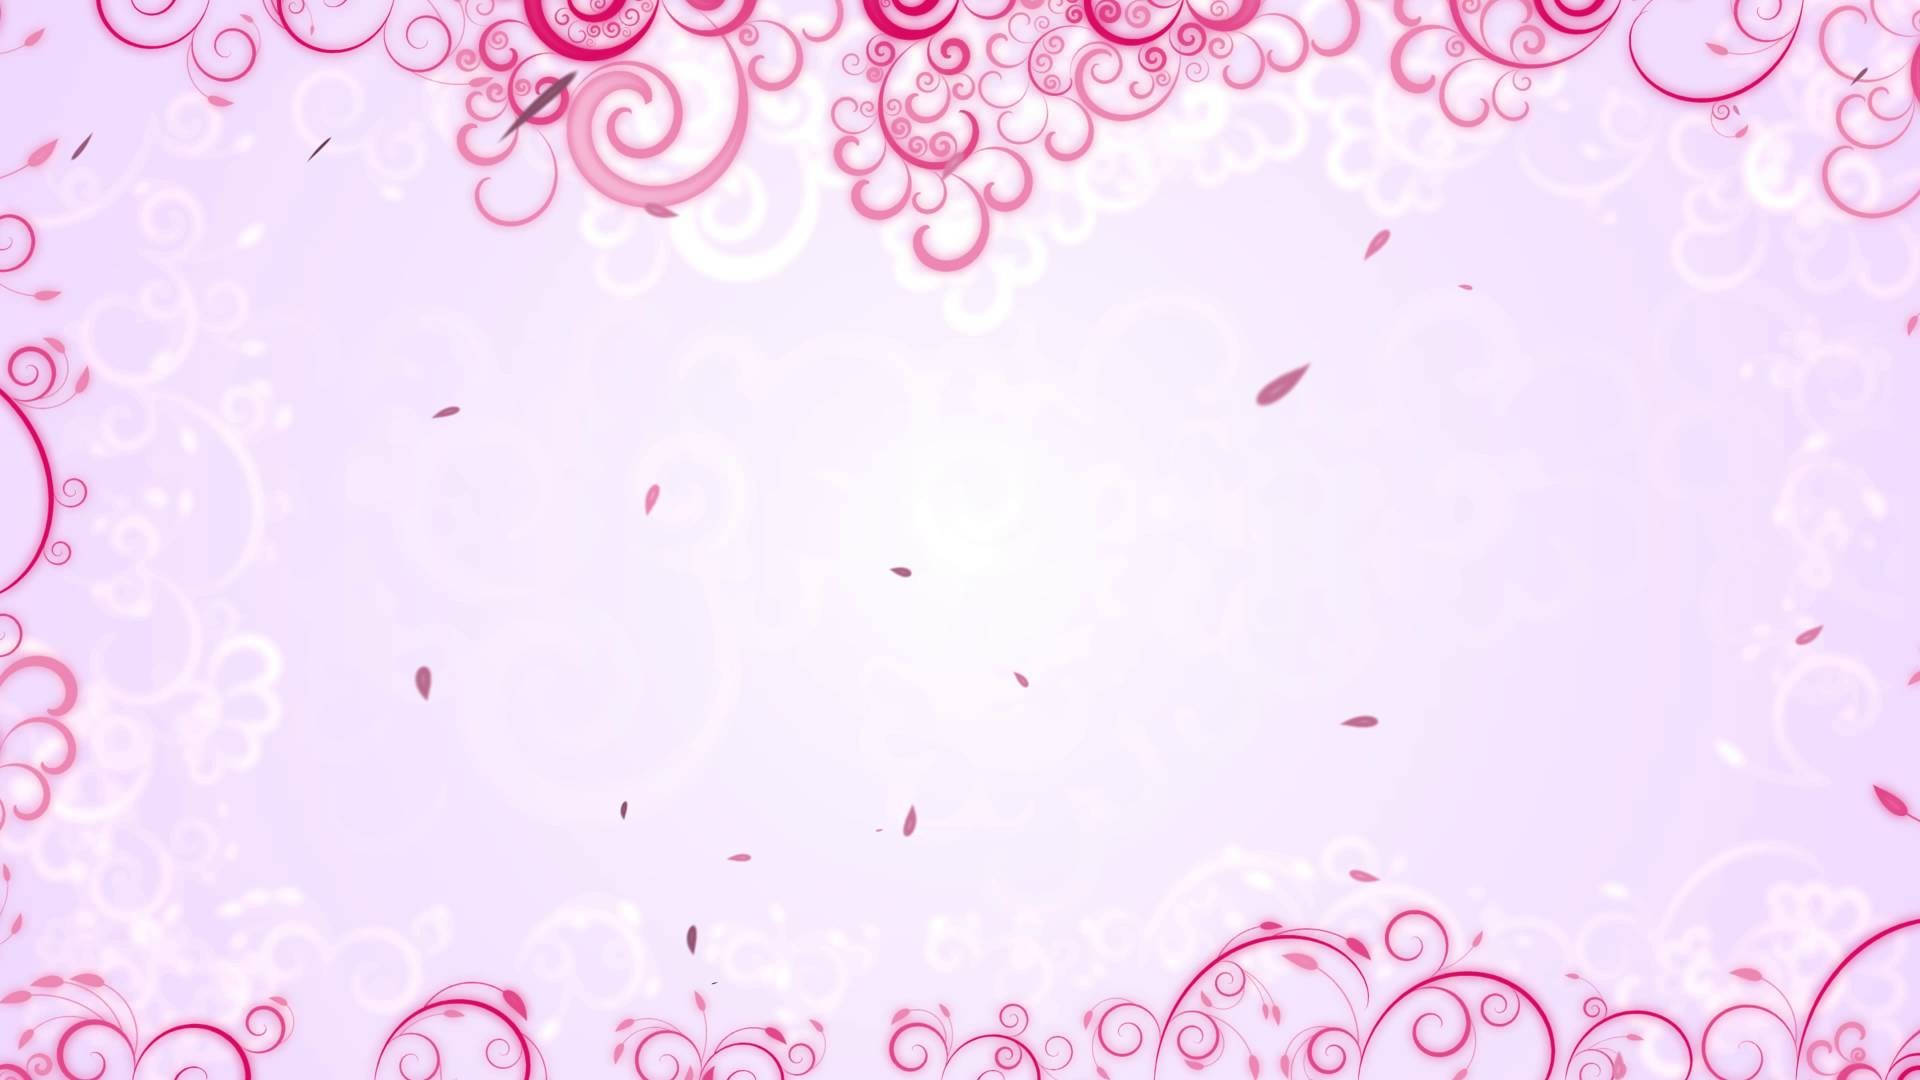 Petals With Pink And White Swirls Wallpaper